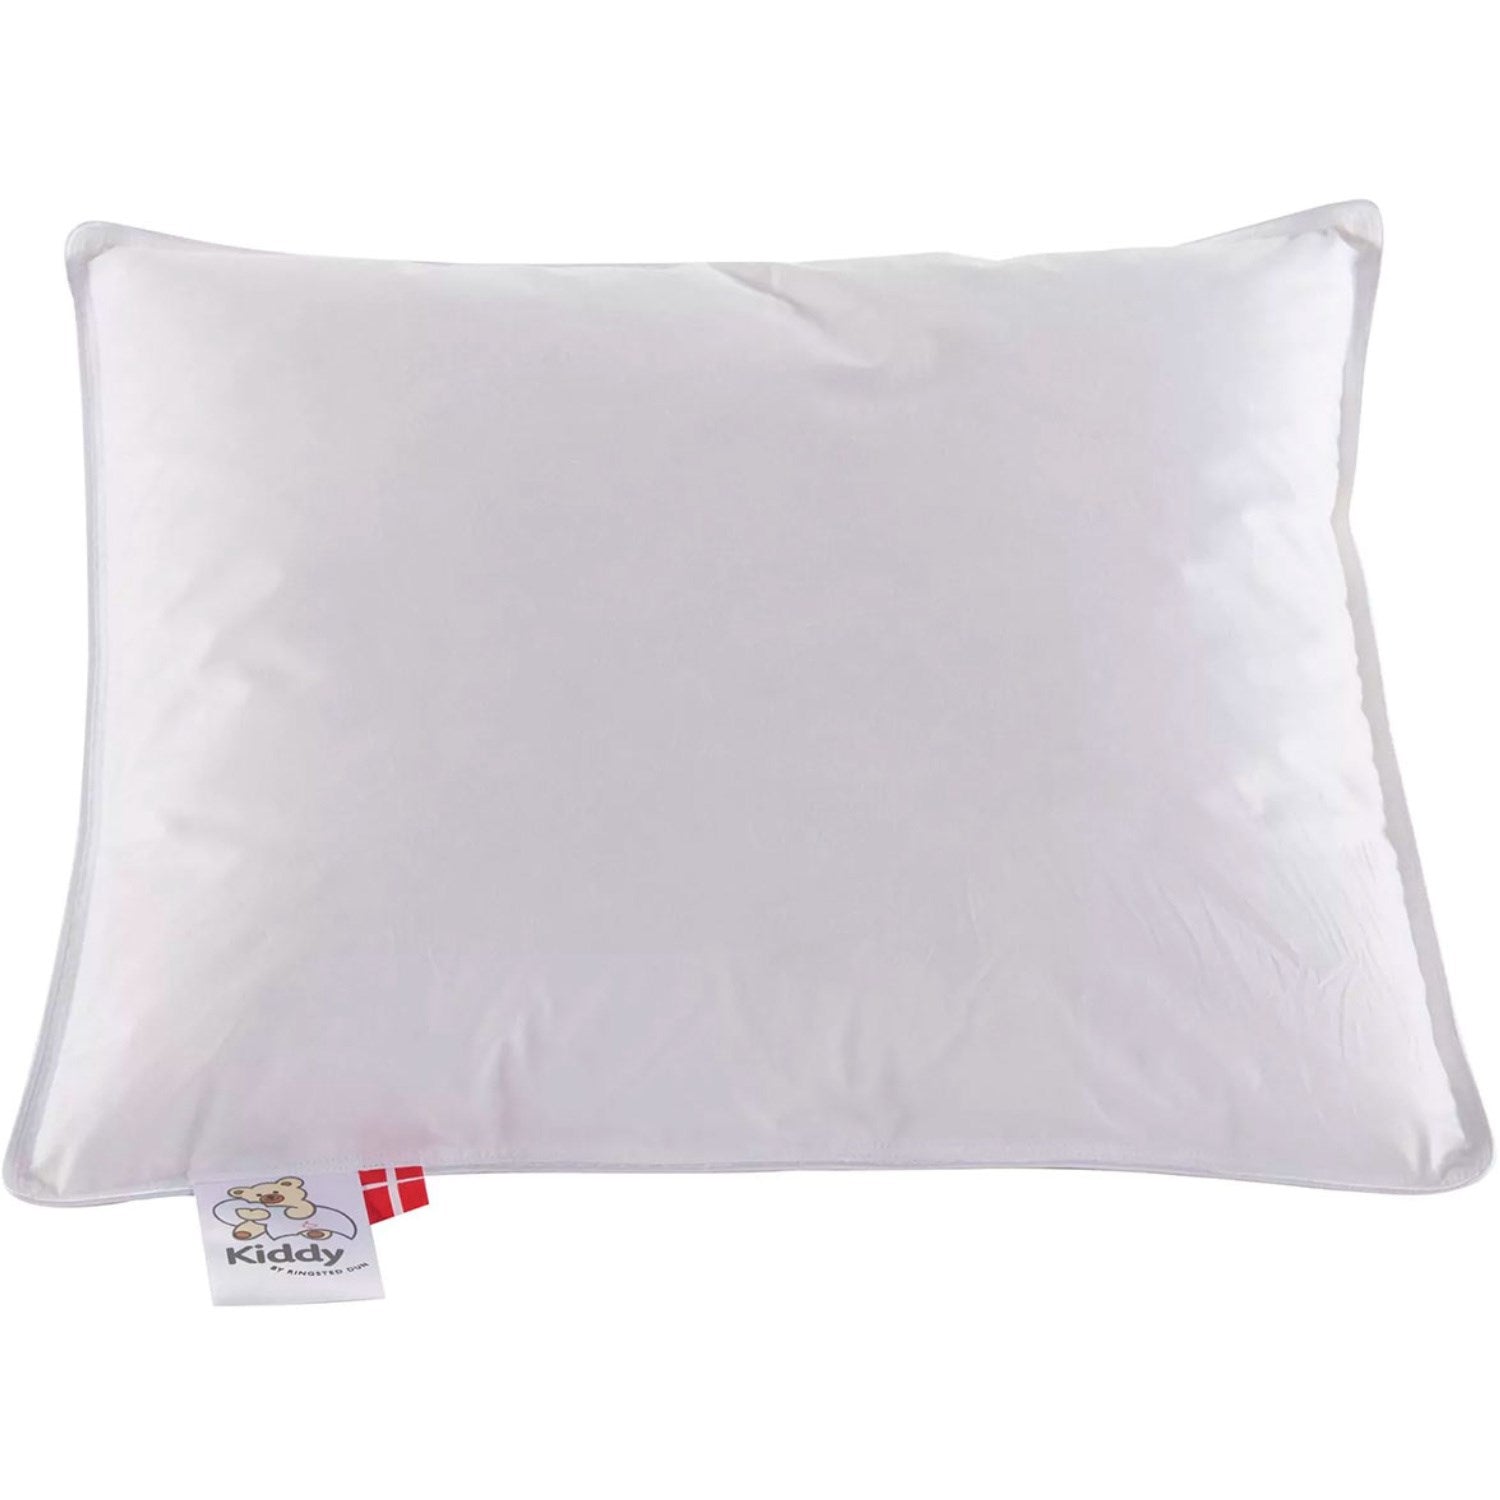 RINGSTED DUN Kiddy Junior Pillow